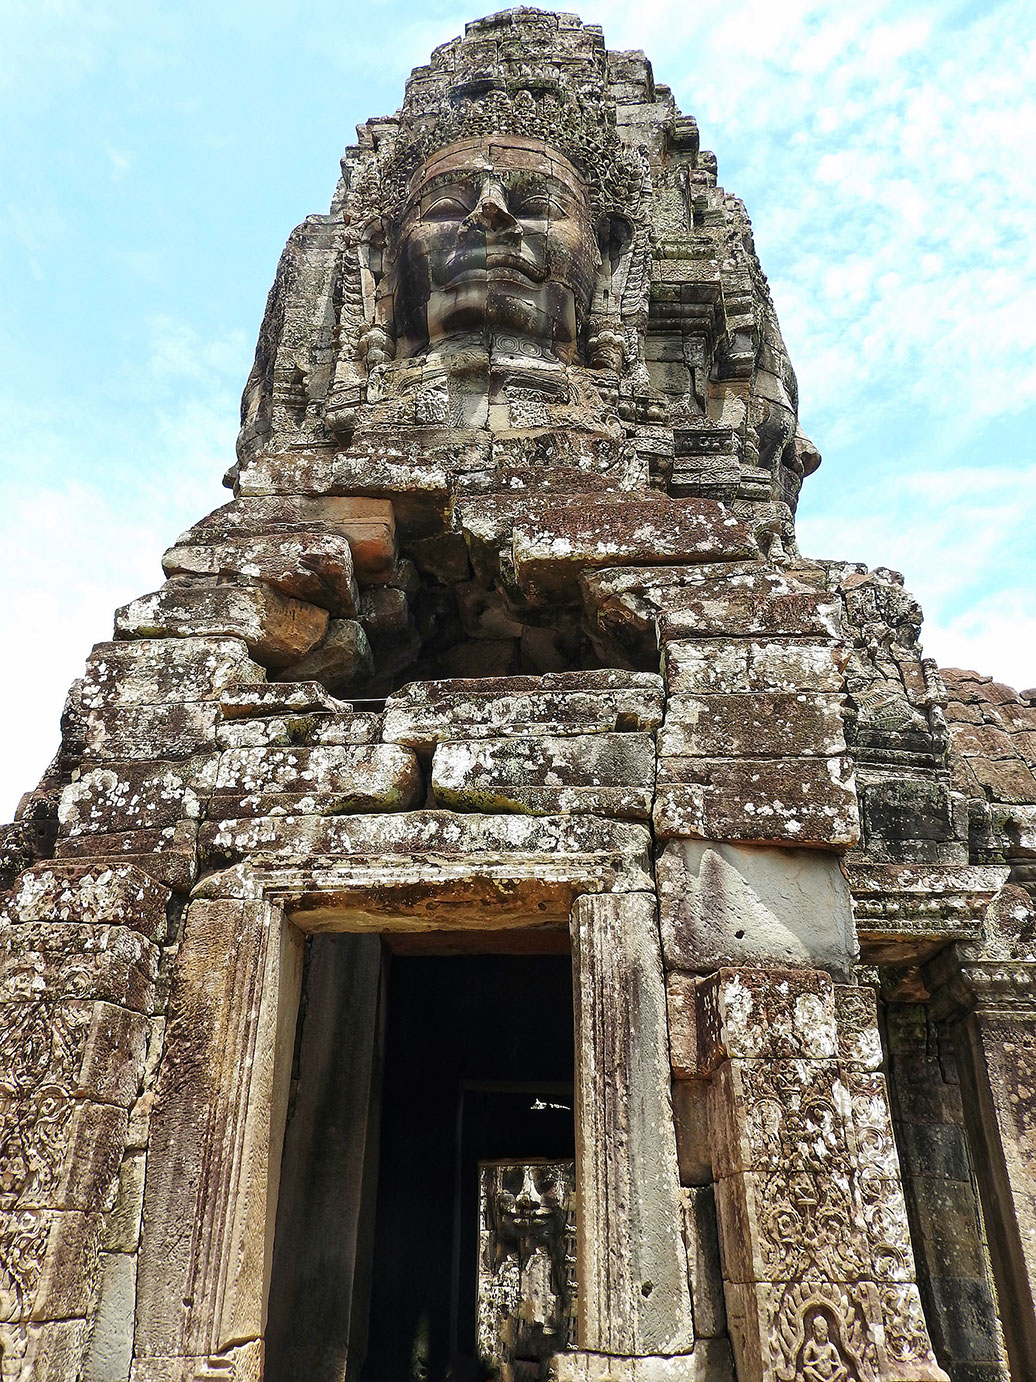 The walls and pillars of Bayon Temple have fascinating carvings